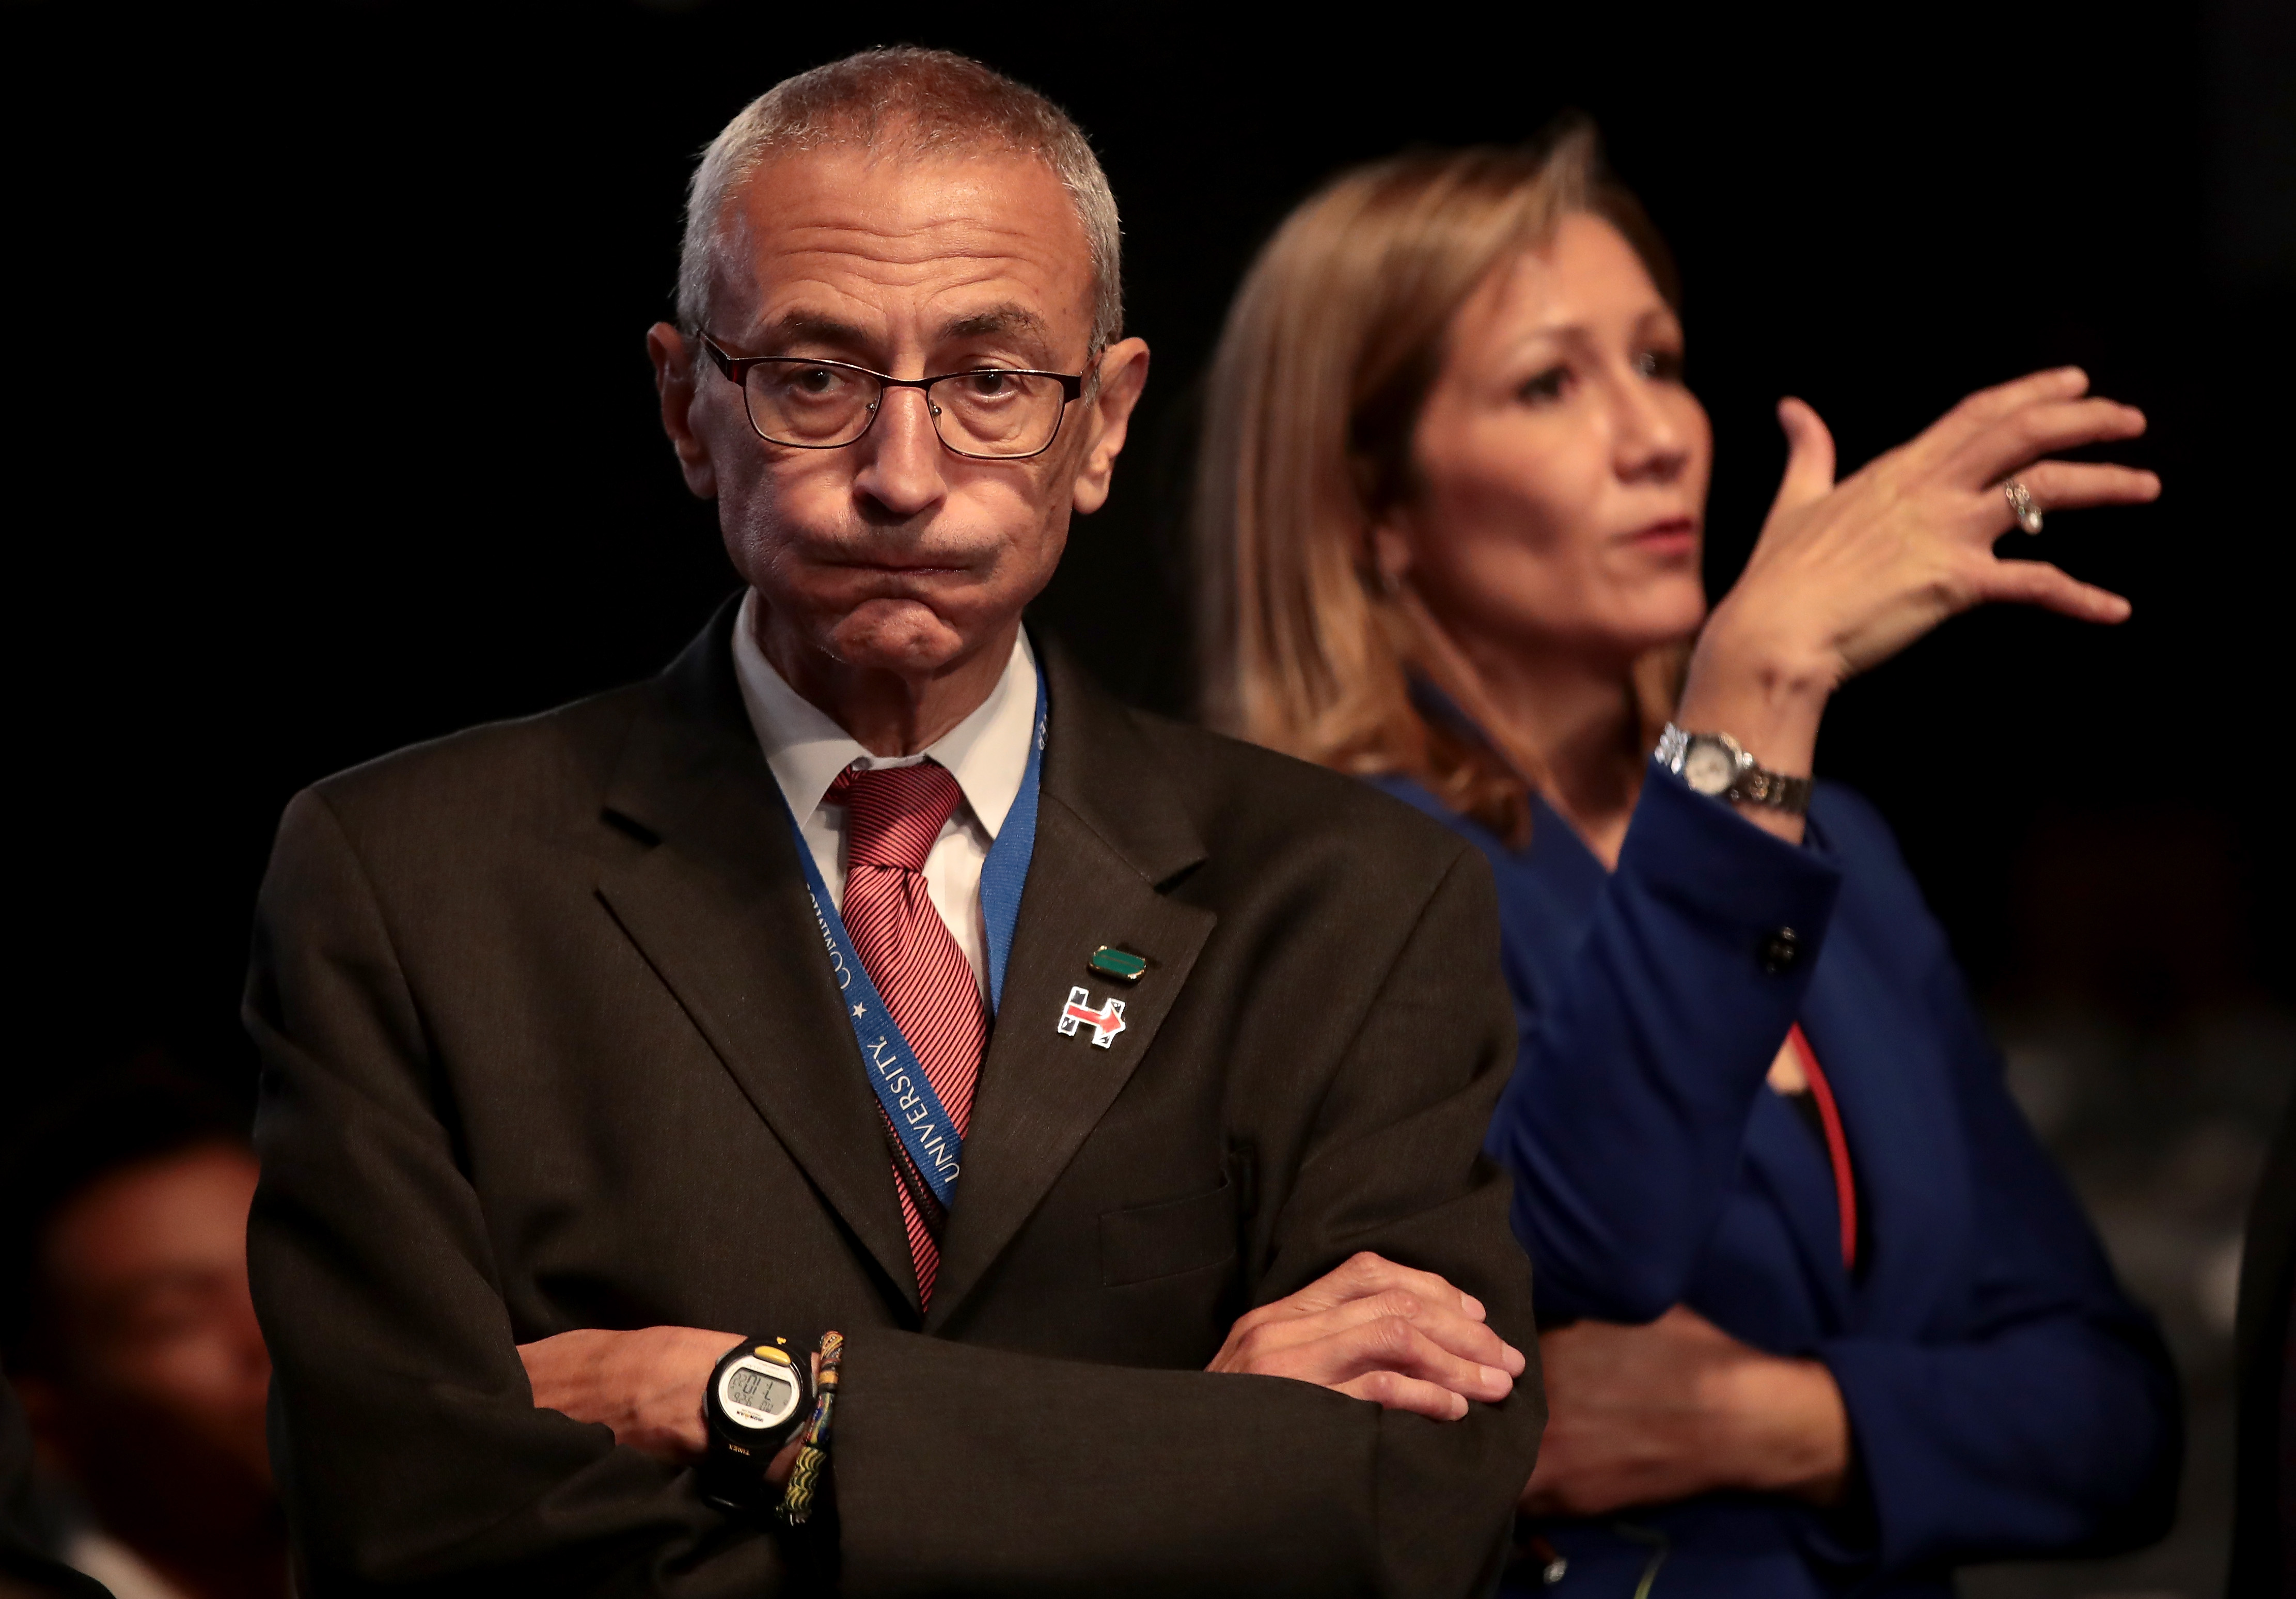 Democratic presidential nominee Hillary Clinton's Campaign Chairman John Podesta (L) looks on prior to the start of the Presidential Debate at Hofstra University on September 26, 2016 in Hempstead, New York. 